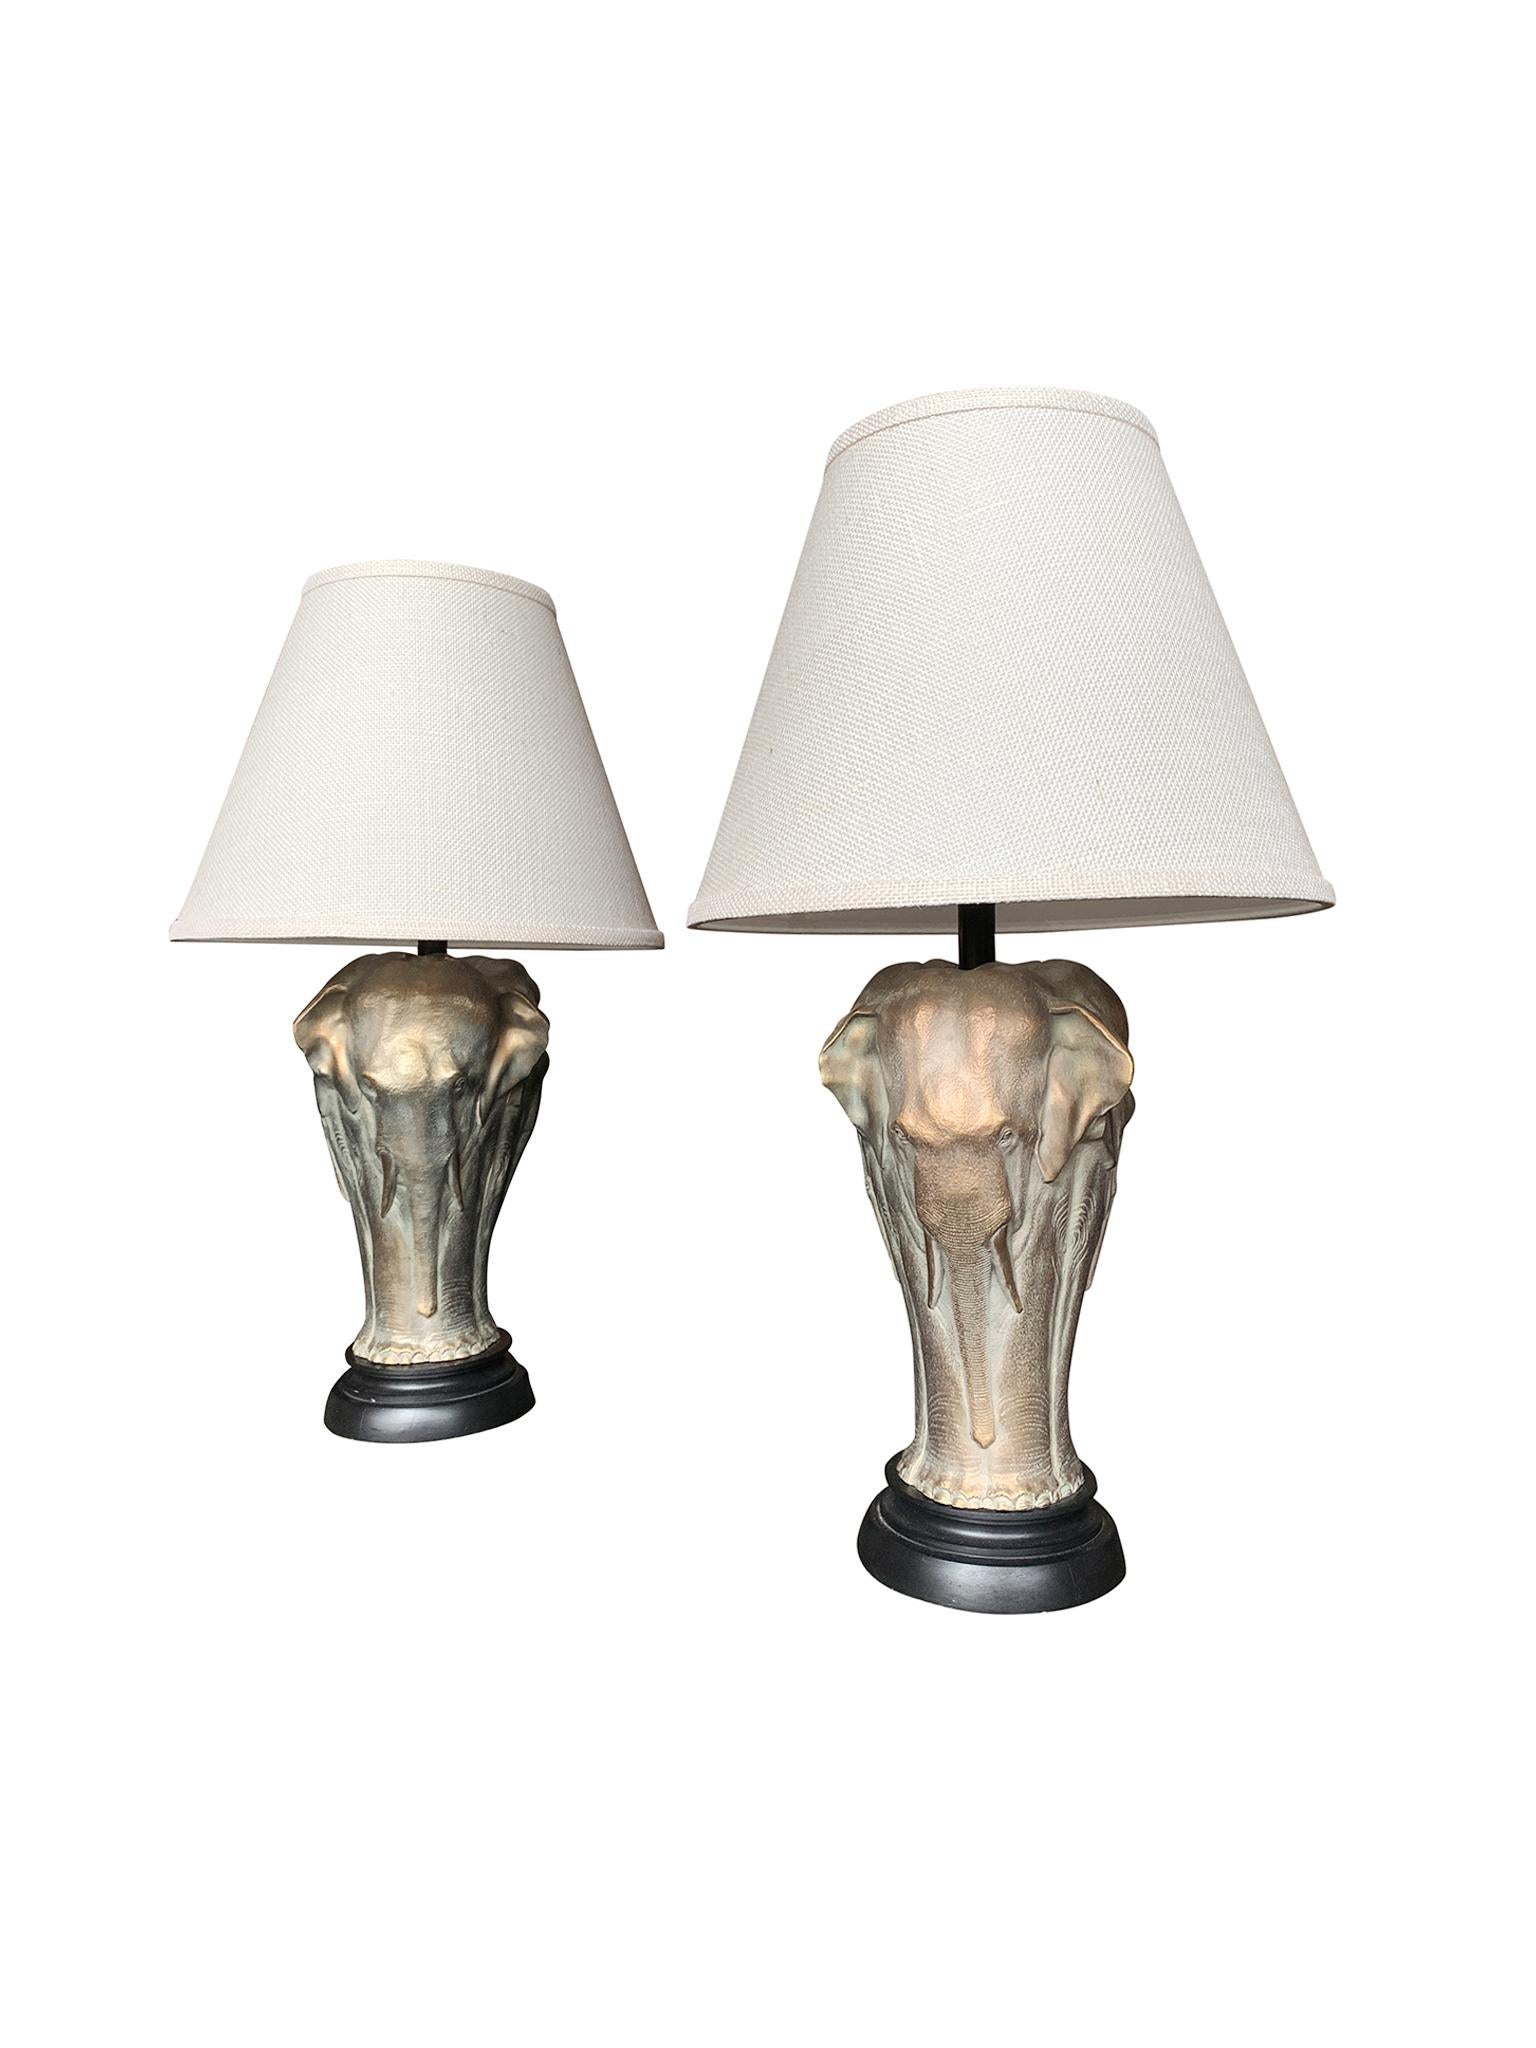 A charming pair of table lamps in cast bronze. Crafted, 20th century. The lamps are designed in the shape of elephants, each lamp being a cluster of three and forming a column. The bronze has a gold patina that gives the surface a nice luster, while